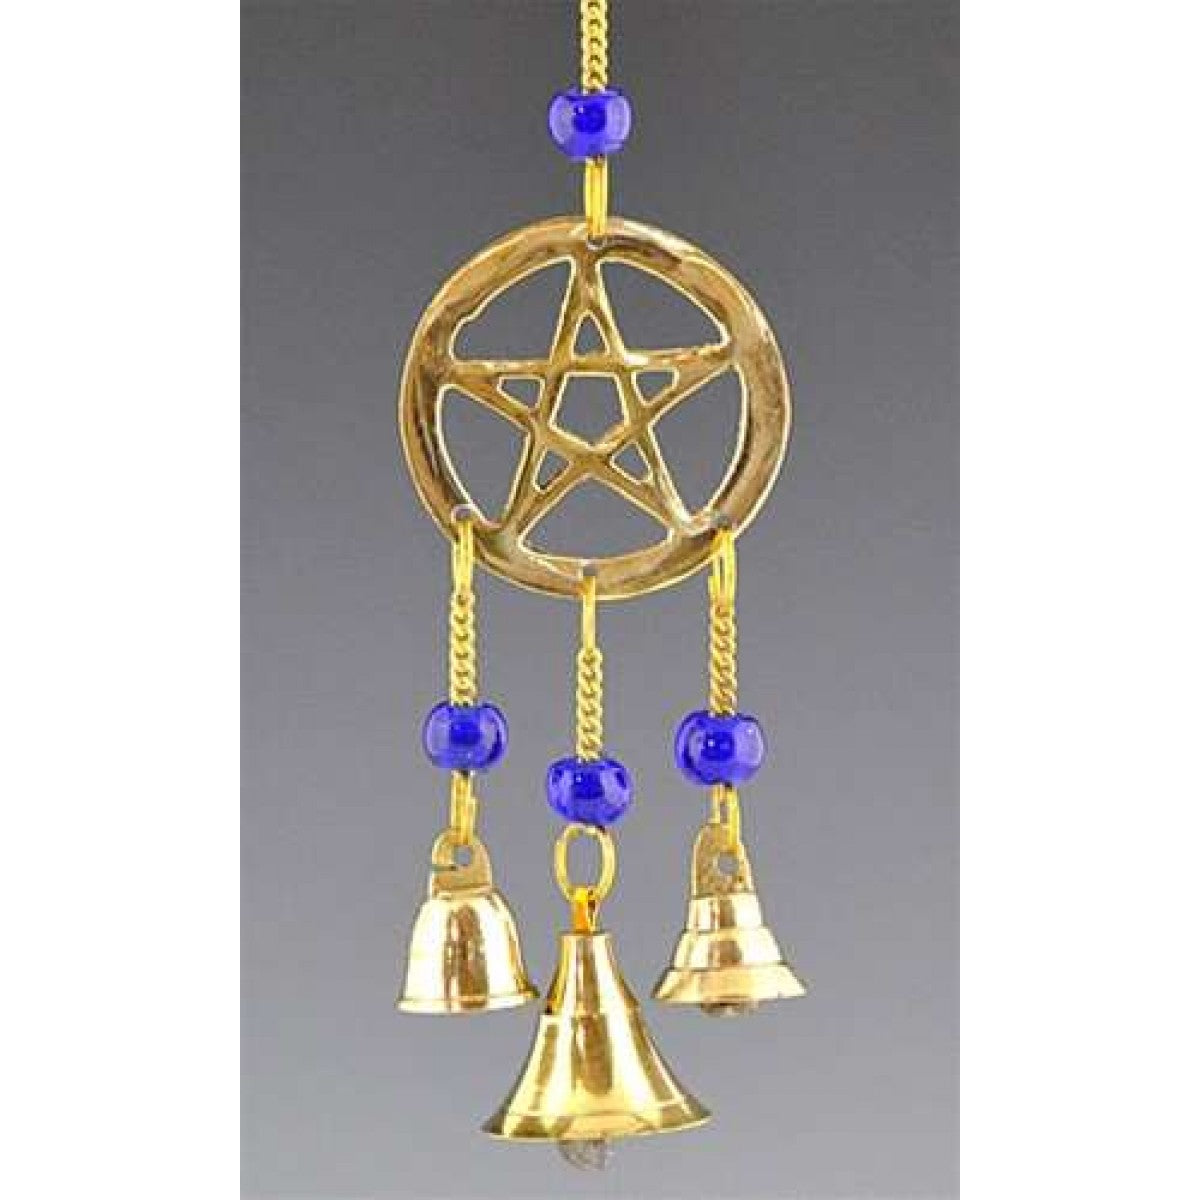 Pentacle Brass Chime with Beads 9"